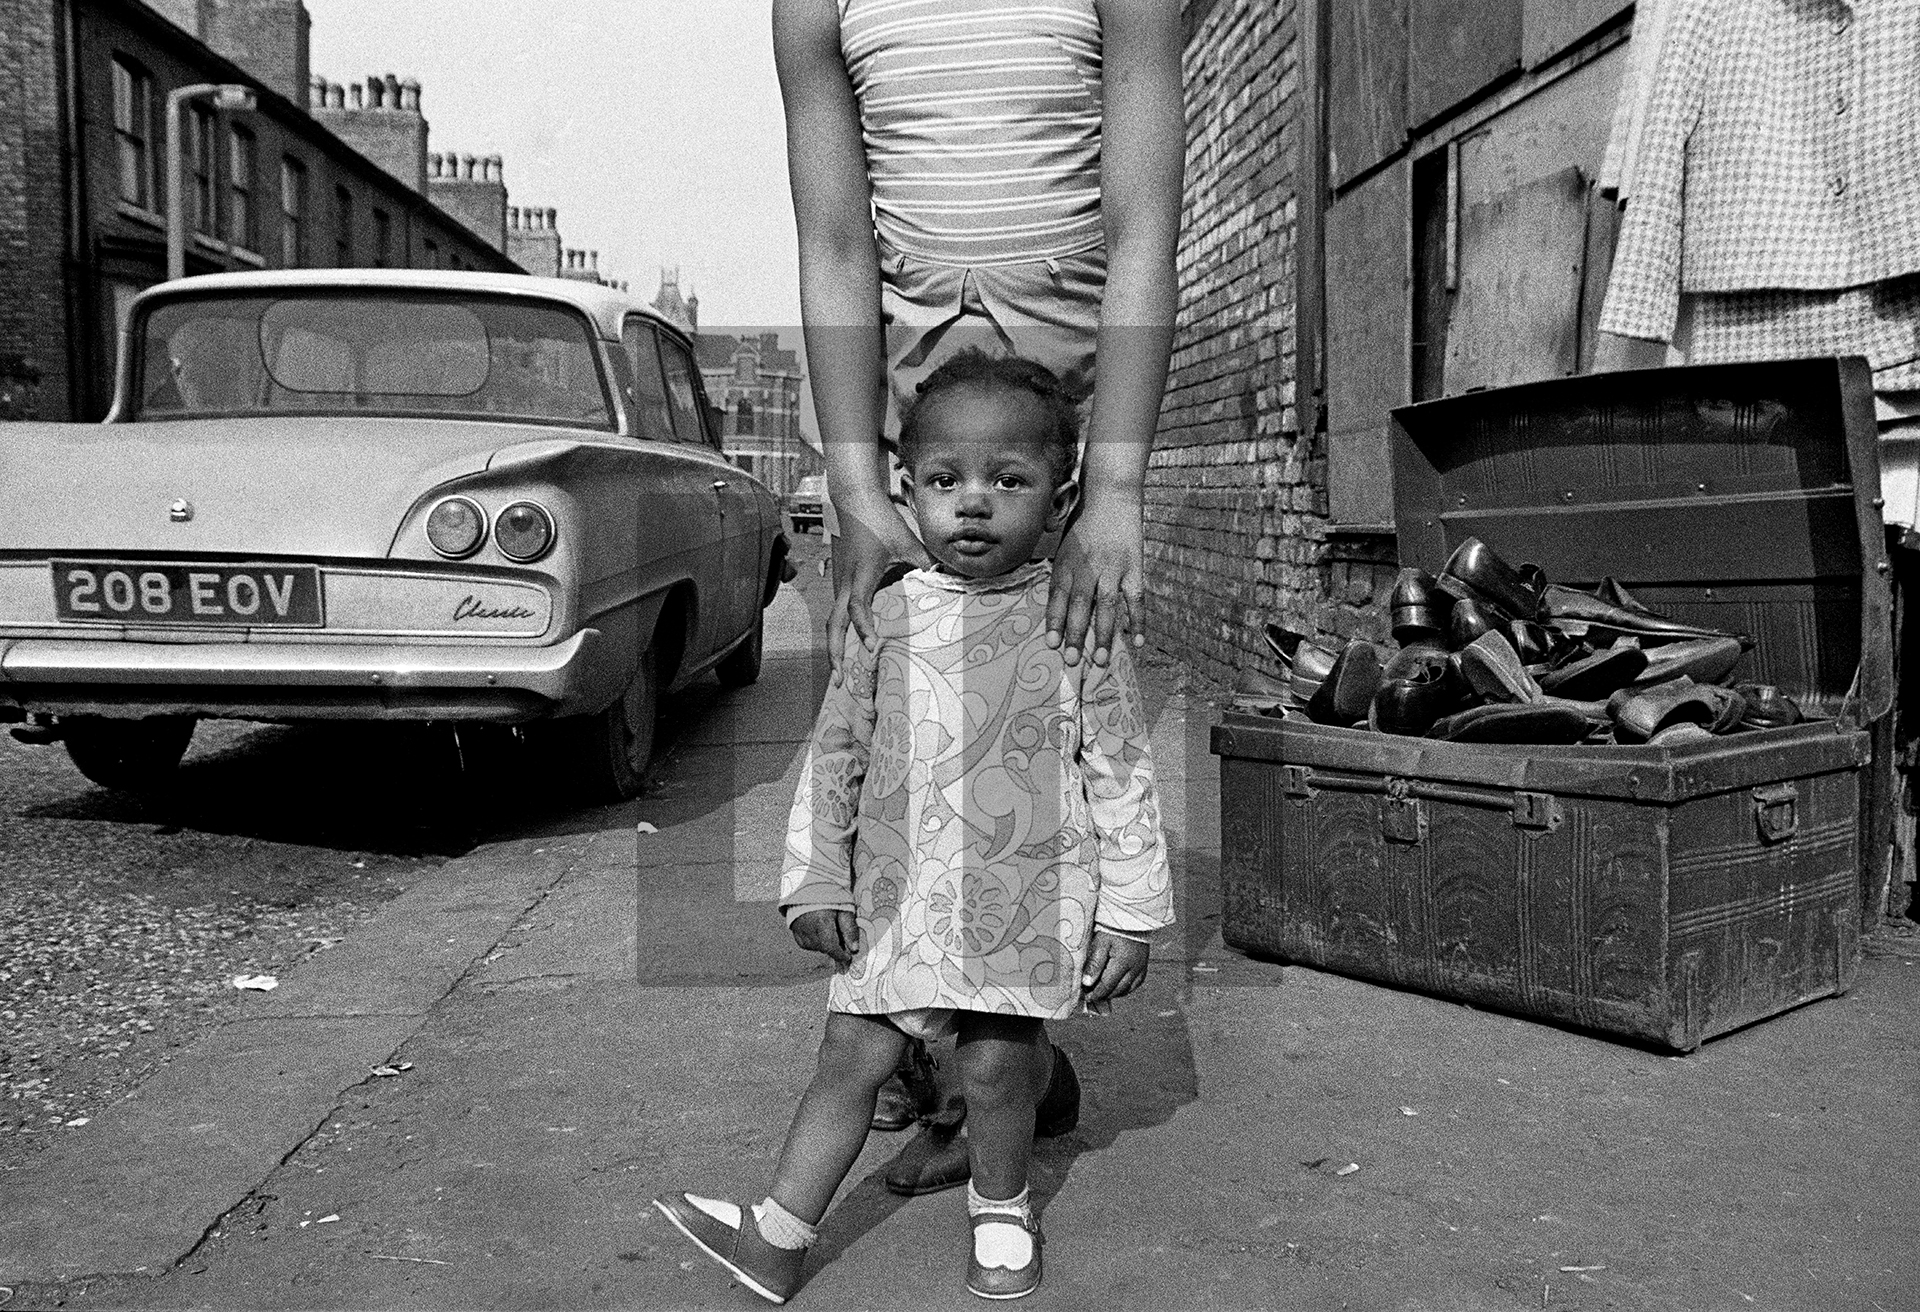 Portrait made on the street outside The Shop on Greame Street, Moss Side, Manchester. February-April 1972 by Daniel Meadows